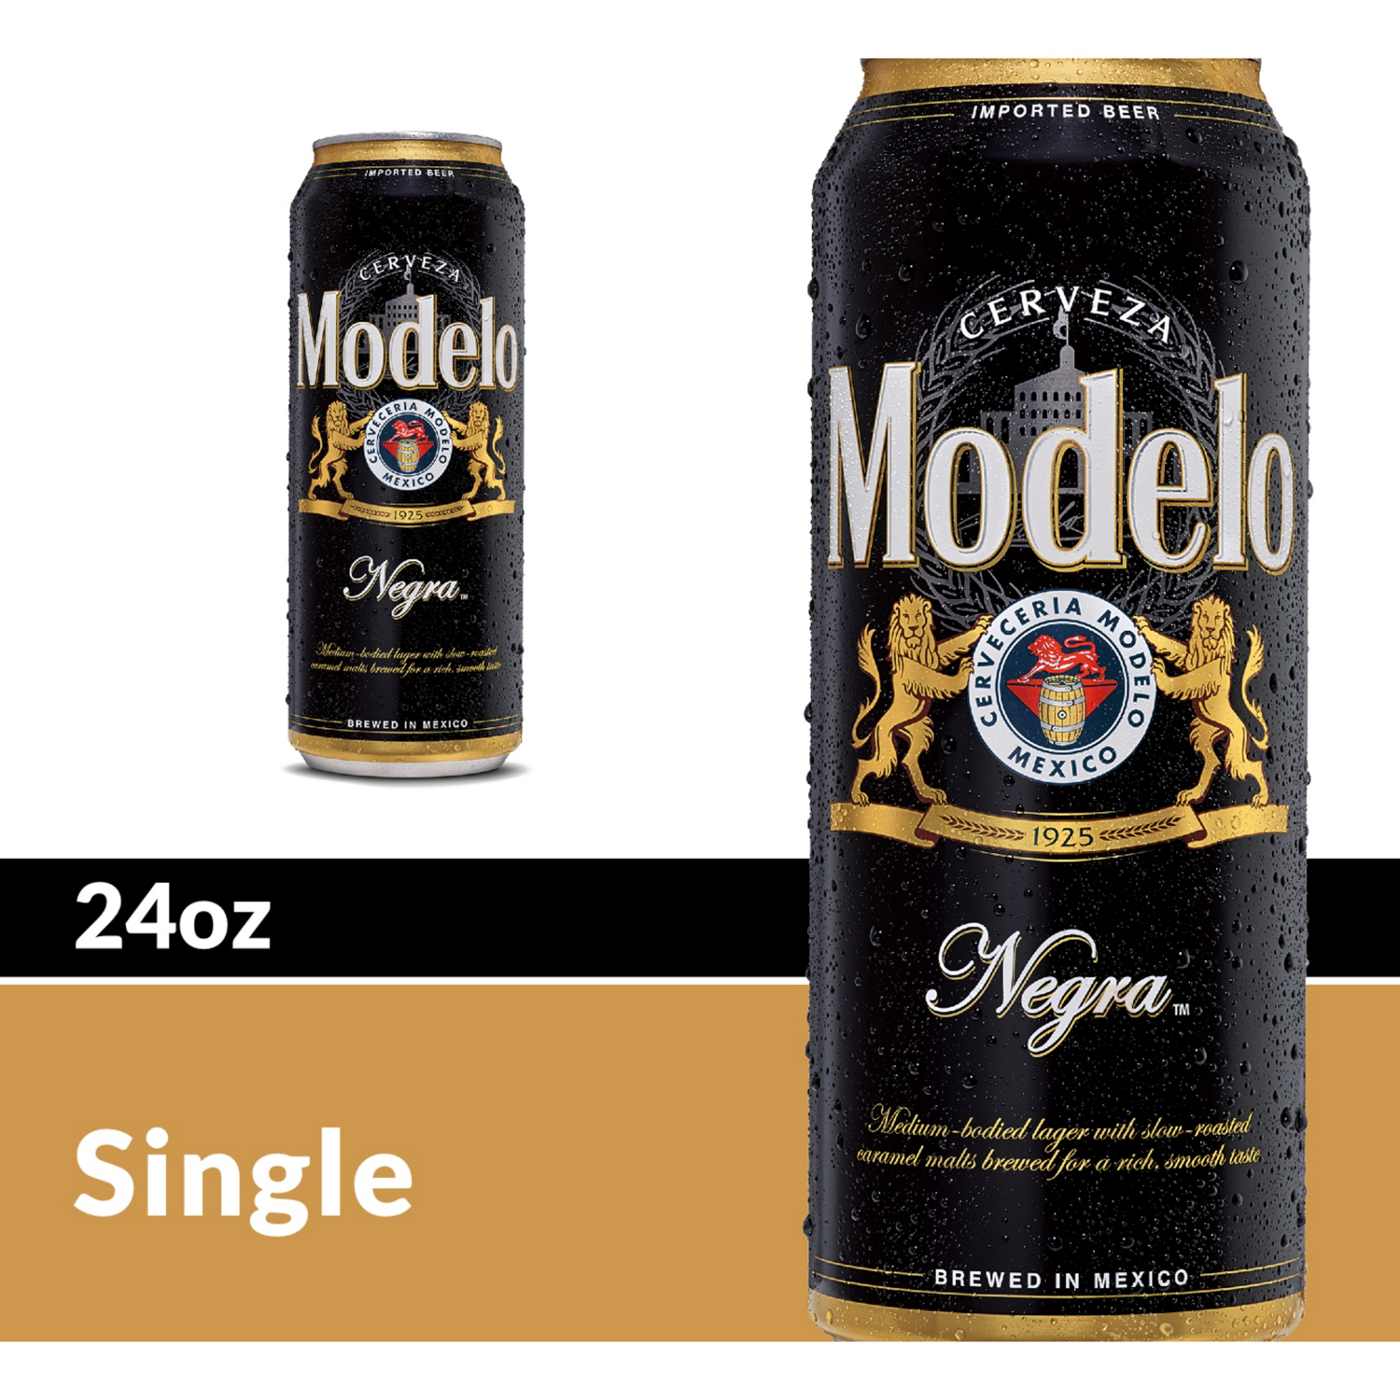 Modelo Negra Amber Lager Mexican Import Beer 24 oz Can; image 8 of 9